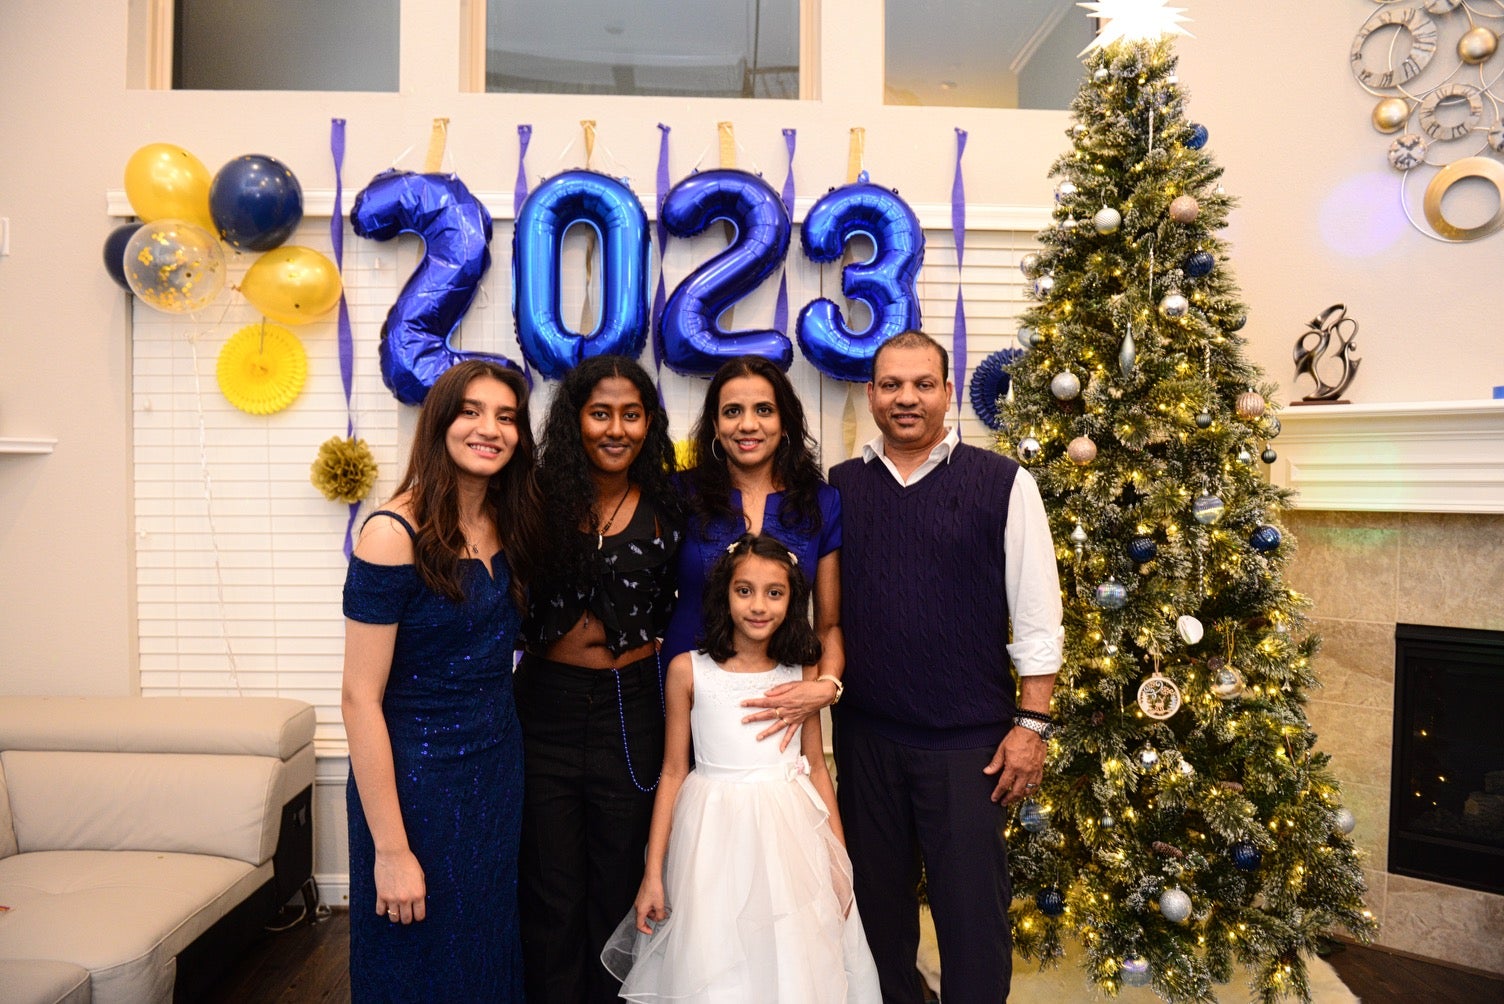 Four adults standing in a row and a child standing in front of them, smiling, with blue balloons that say "2023" and a Christmas tree behind them.